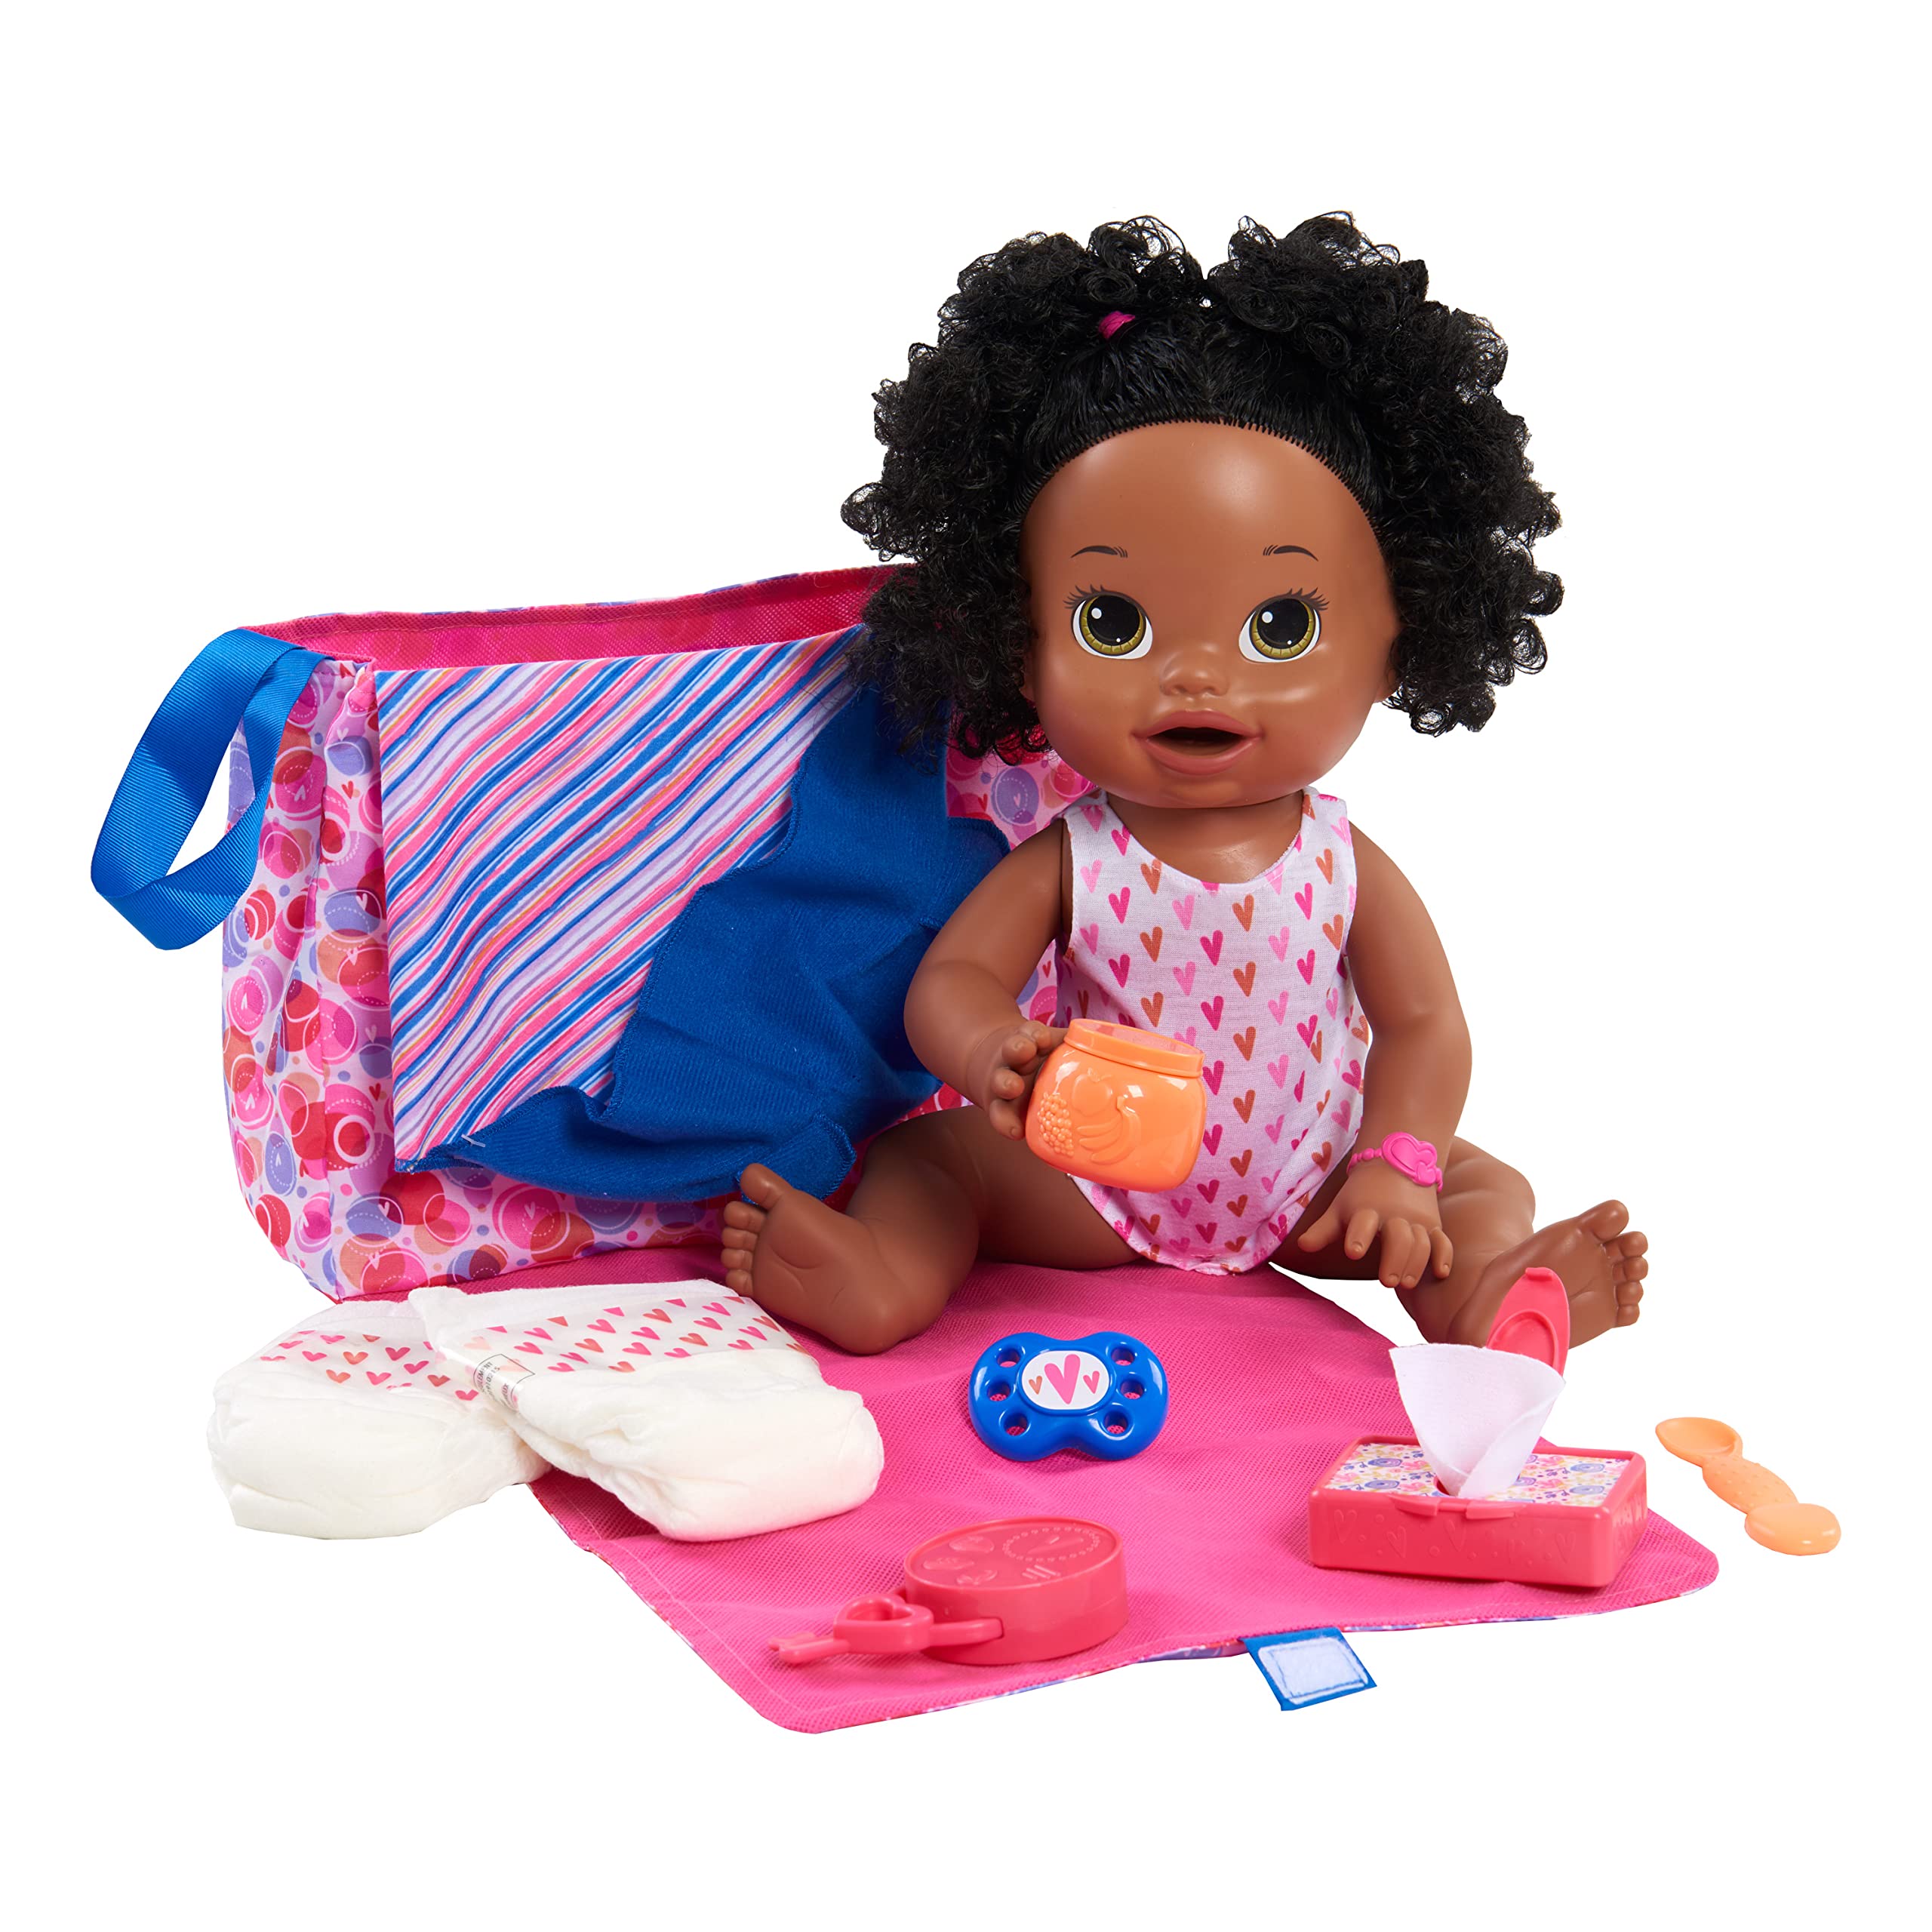 Baby Alive New Mommy Kit, Kids Toys for Ages 3 Up, Gifts and Presents by Just Play